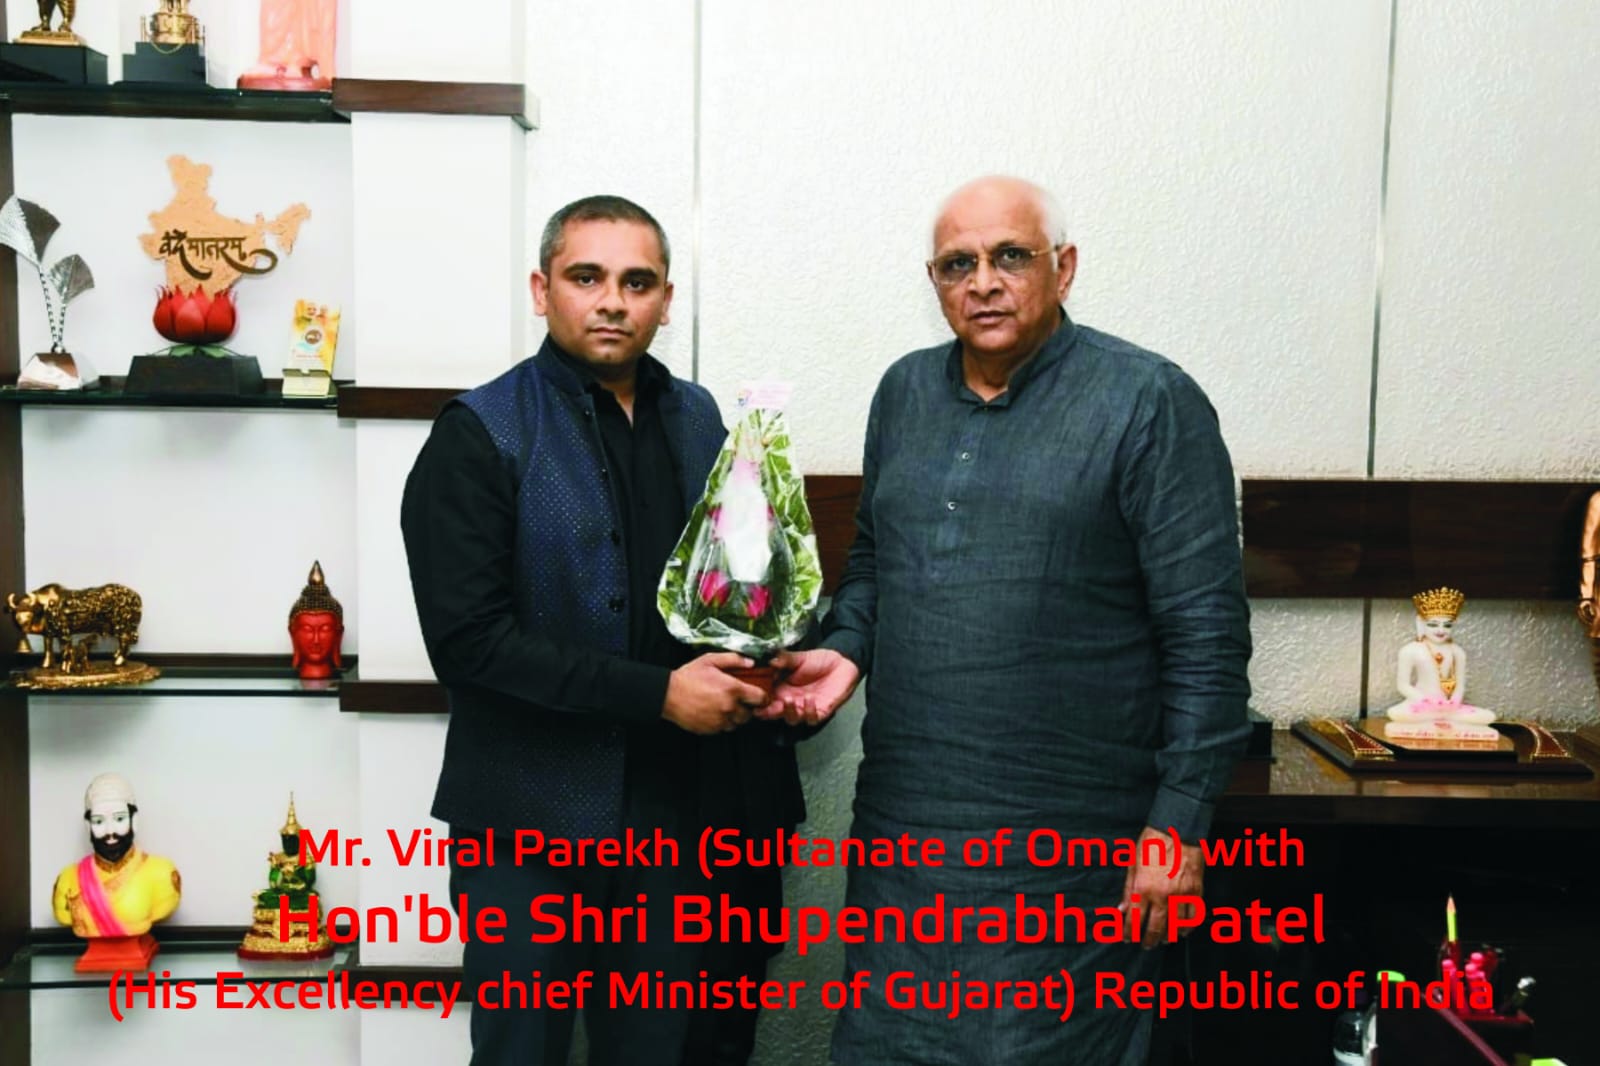 Mr. Viral Parekh (Sultanate of Oman) with Hon'ble Shri Bhupendrabhai Patel (His Excellency chief Minister of Gujarat) Republic of India